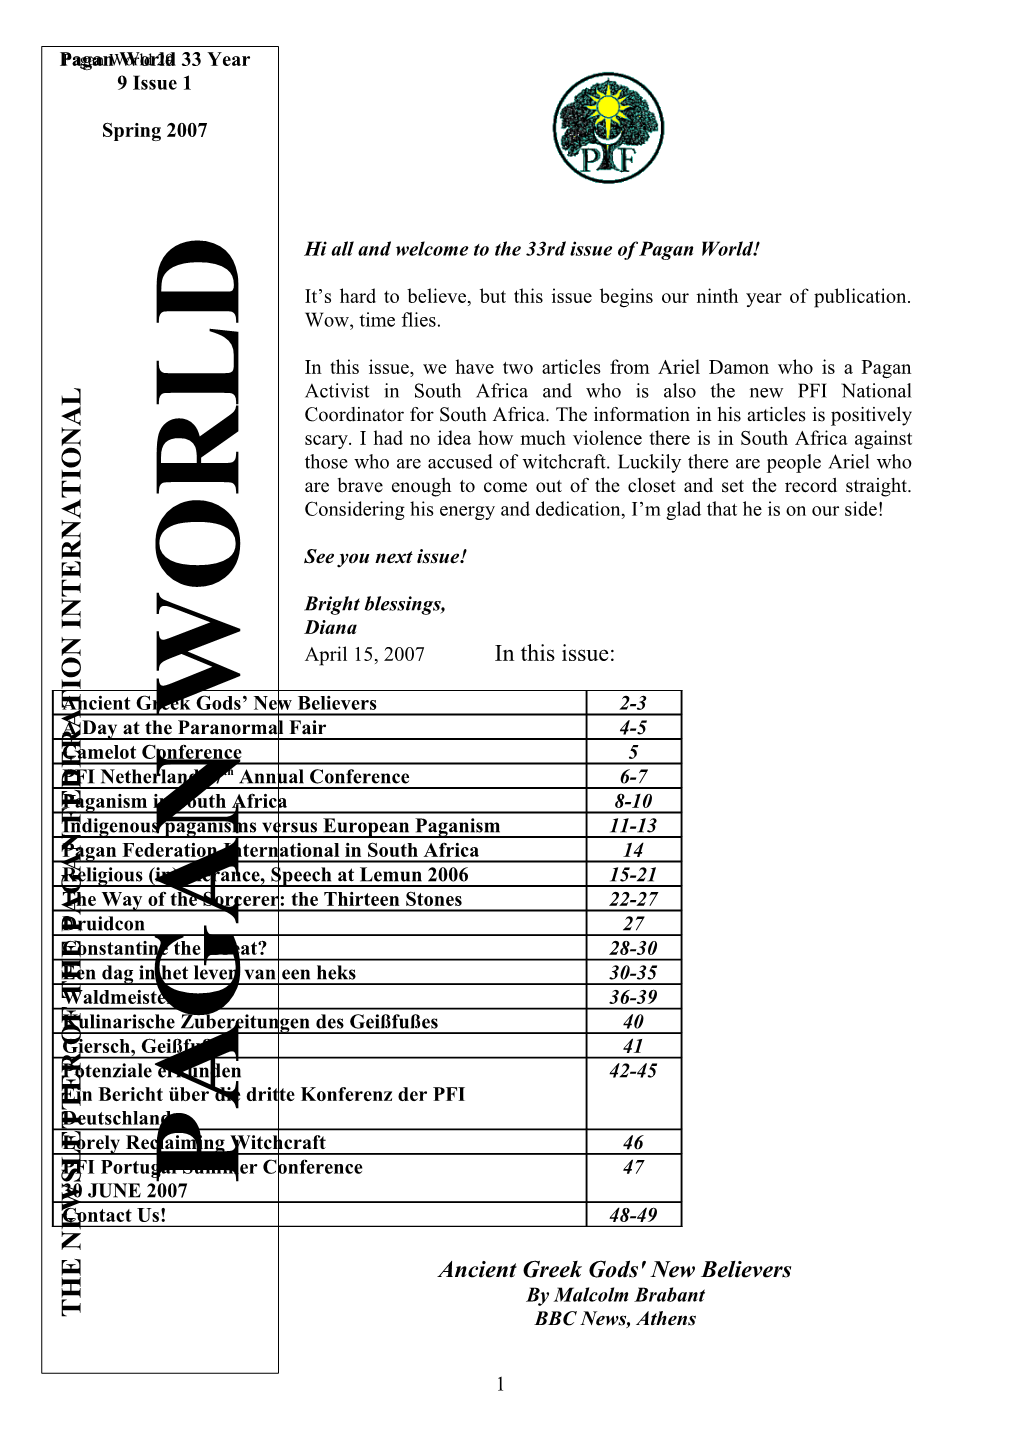 Hi All and Welcome to the 33Rd Issue of Pagan World!